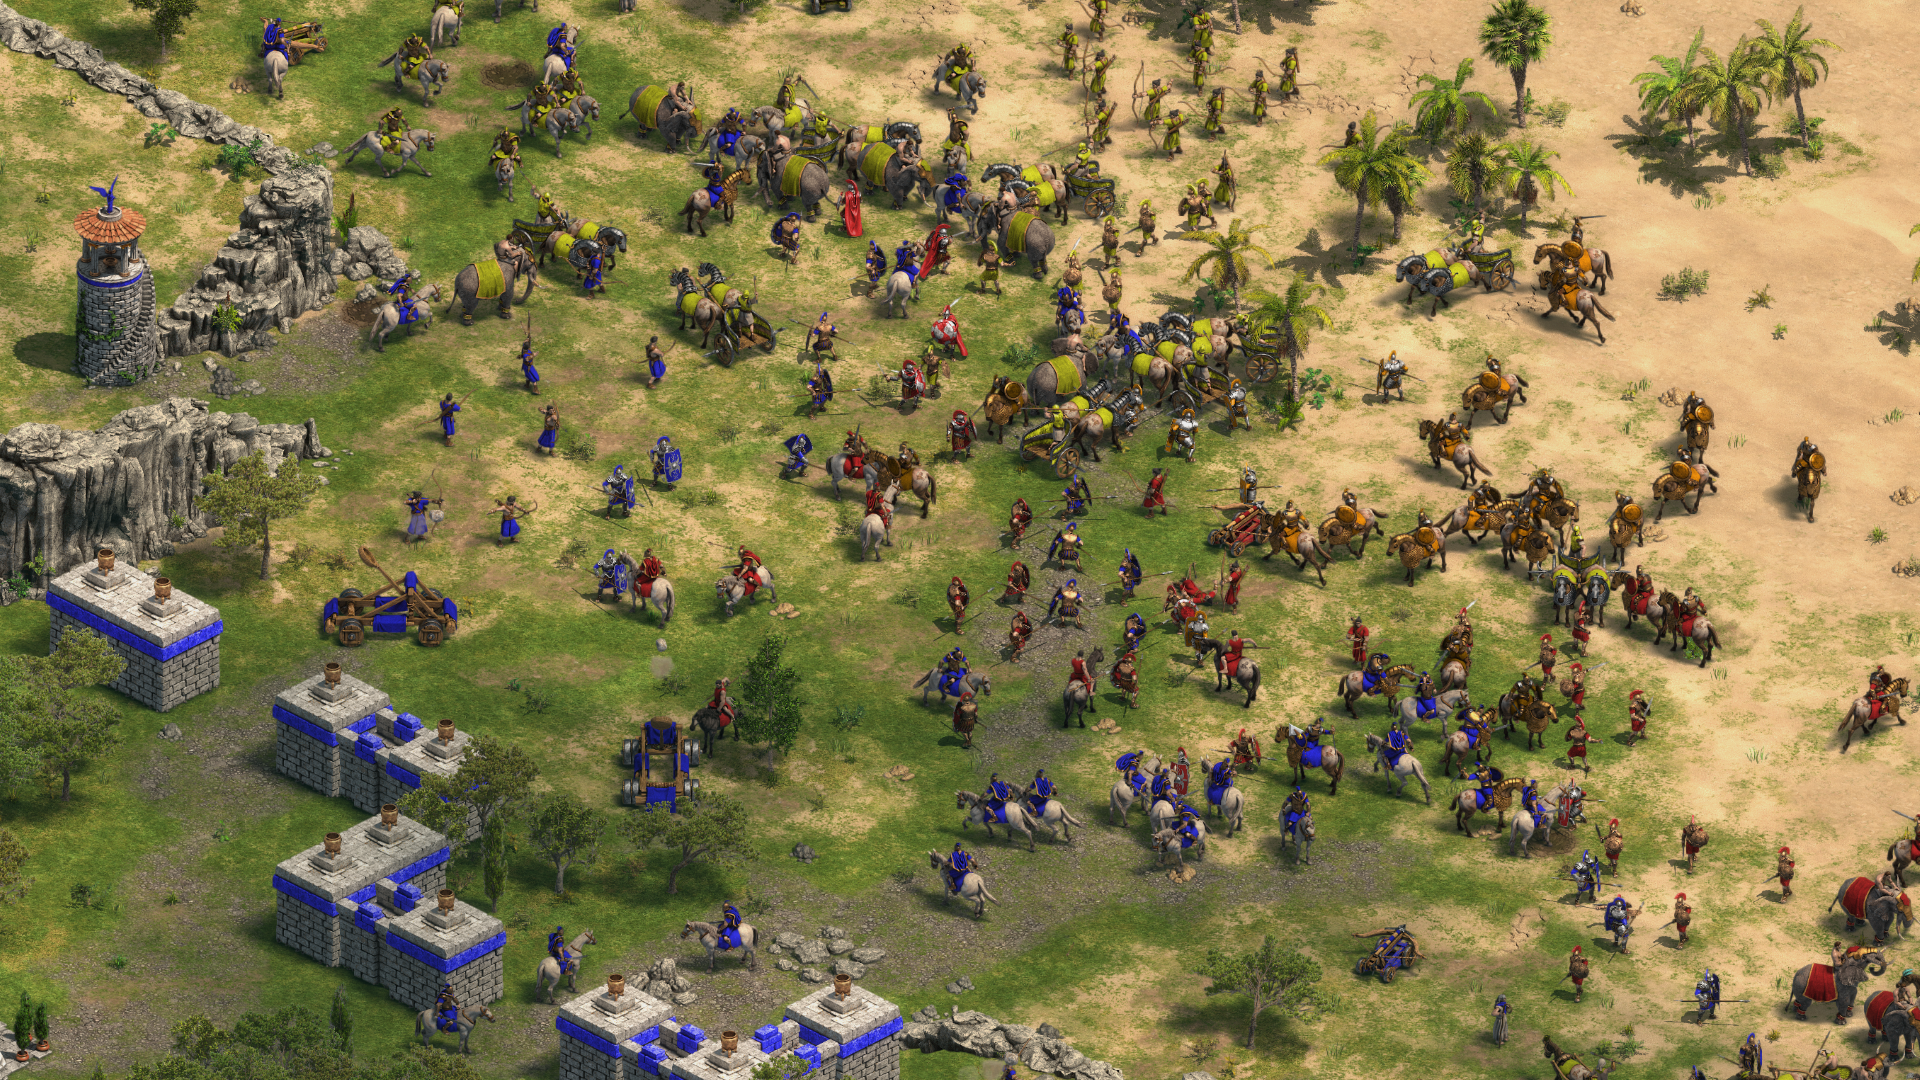 Screenshot of Age of Empires: Definitive Edition gameplay.